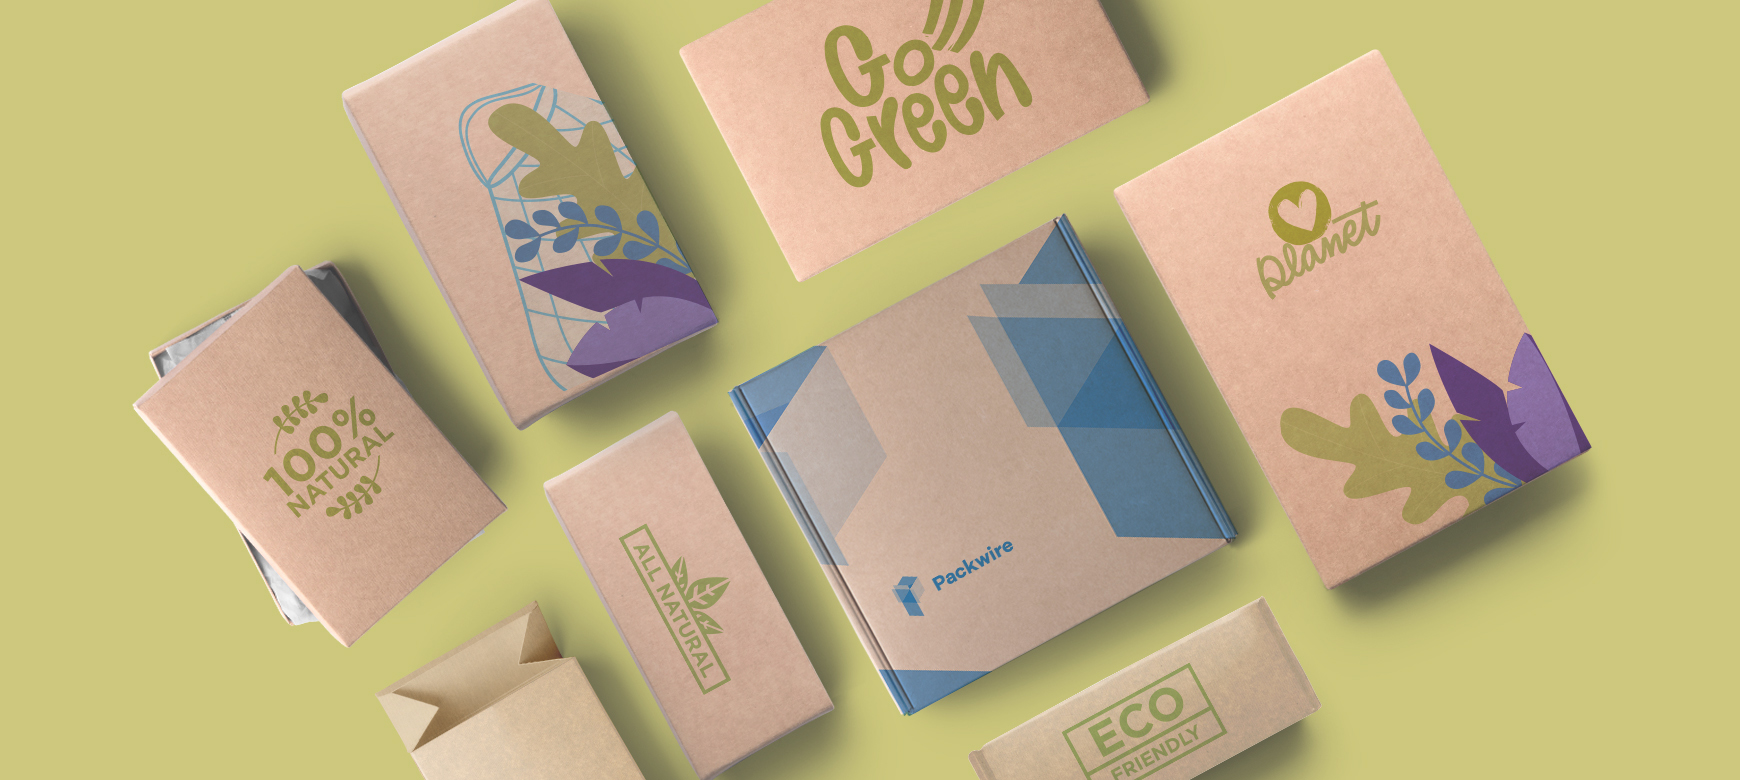 Kenvue is dedicated to eco-friendly and sustainable packaging innovations  to make the world greener - A new view of care